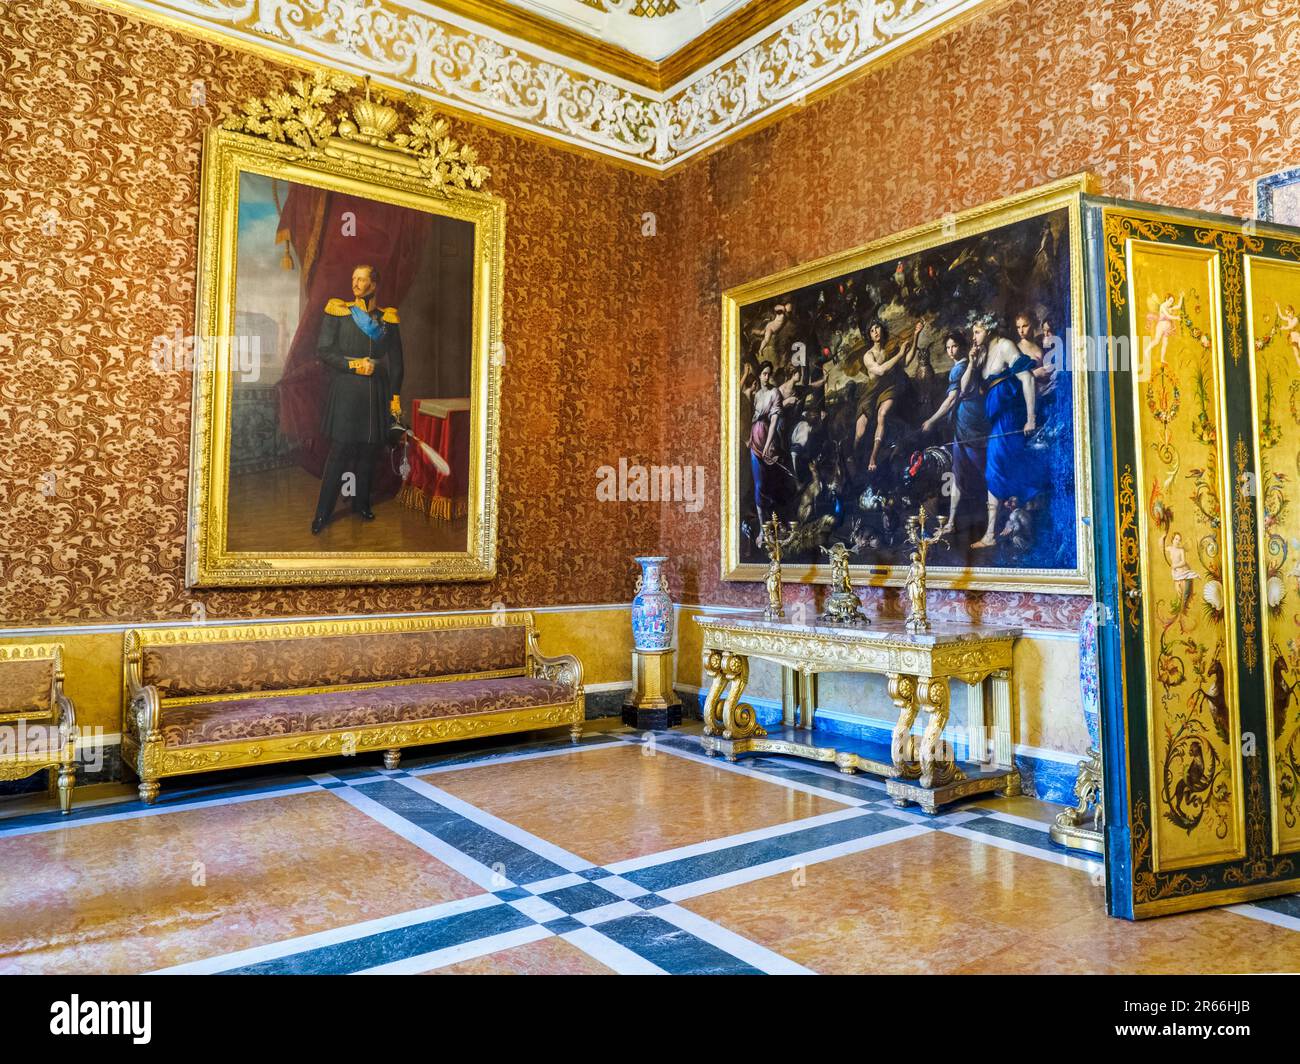 The Queen's room with his Neapolitans School paintings of the 17th-18th century - Royal Palace of Naples that In 1734 became the royal residence of the Bourbons - Naples, Italy Stock Photo